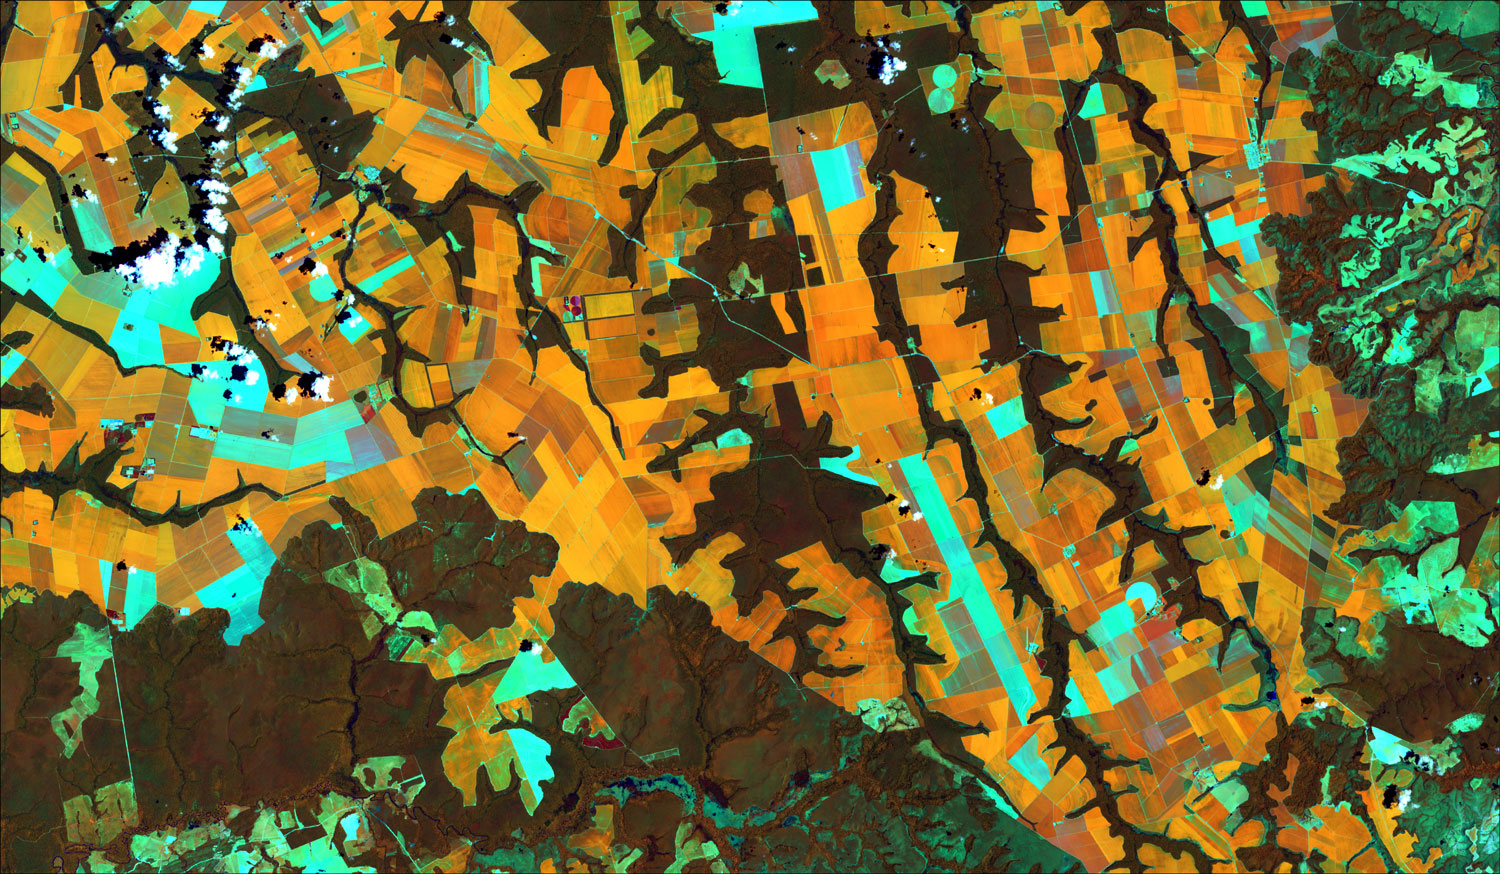 Satellites have also enabled COFCO International to map and assess the compliance of more than 1.2 million hectares of soy farms around Brazil on annual basis.  